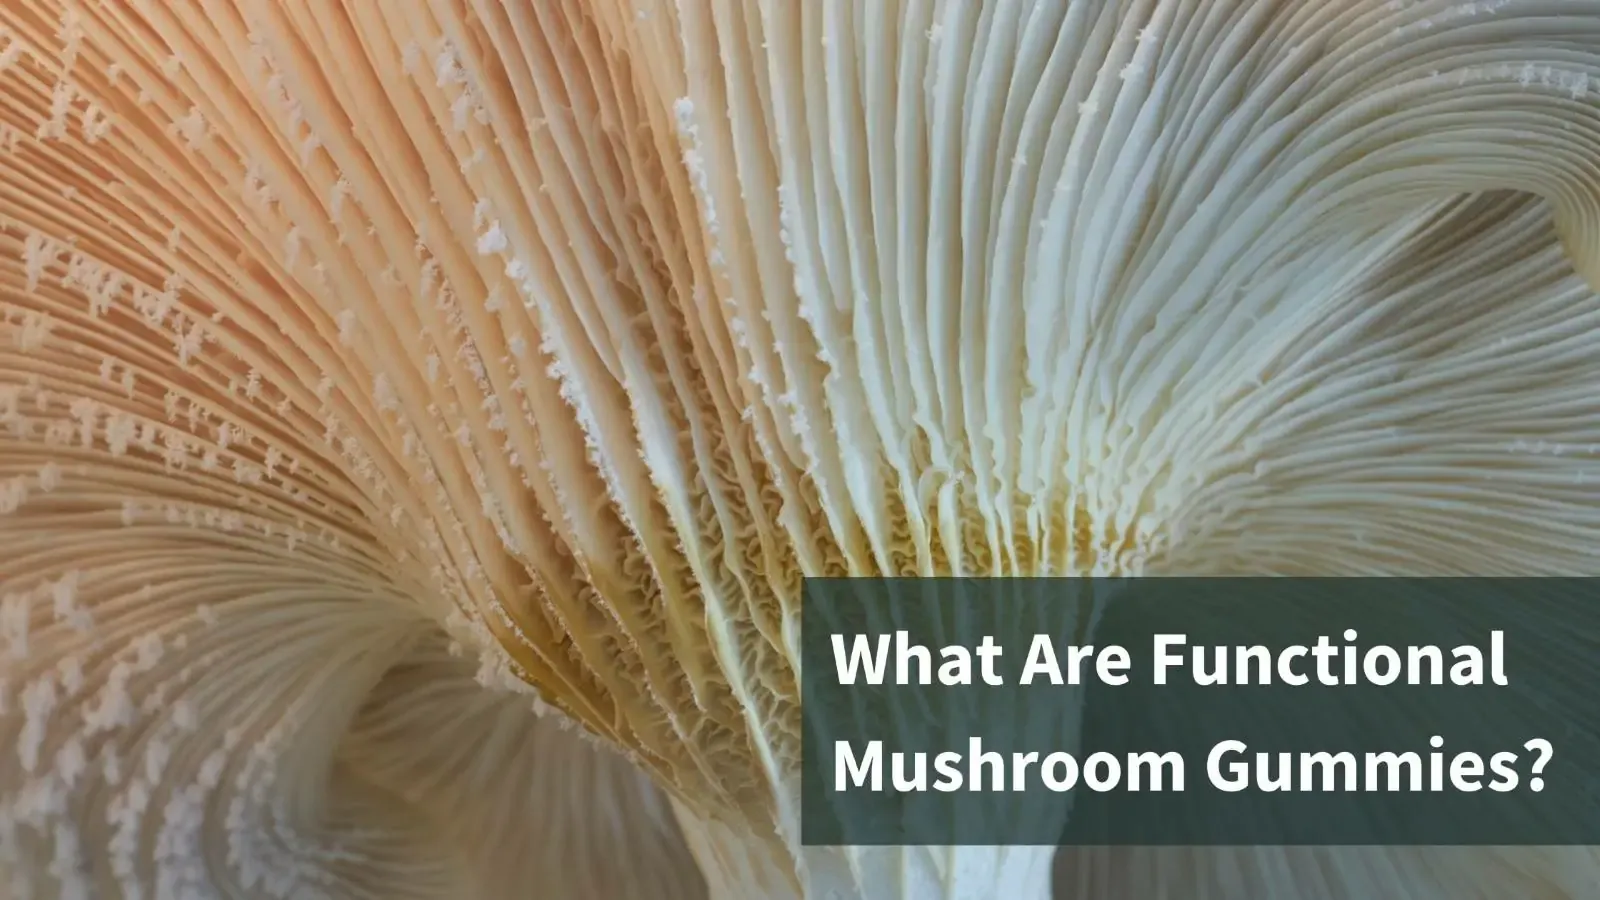 The gills of an oyster mushroom. Text reads "What are functional mushroom gummies?"